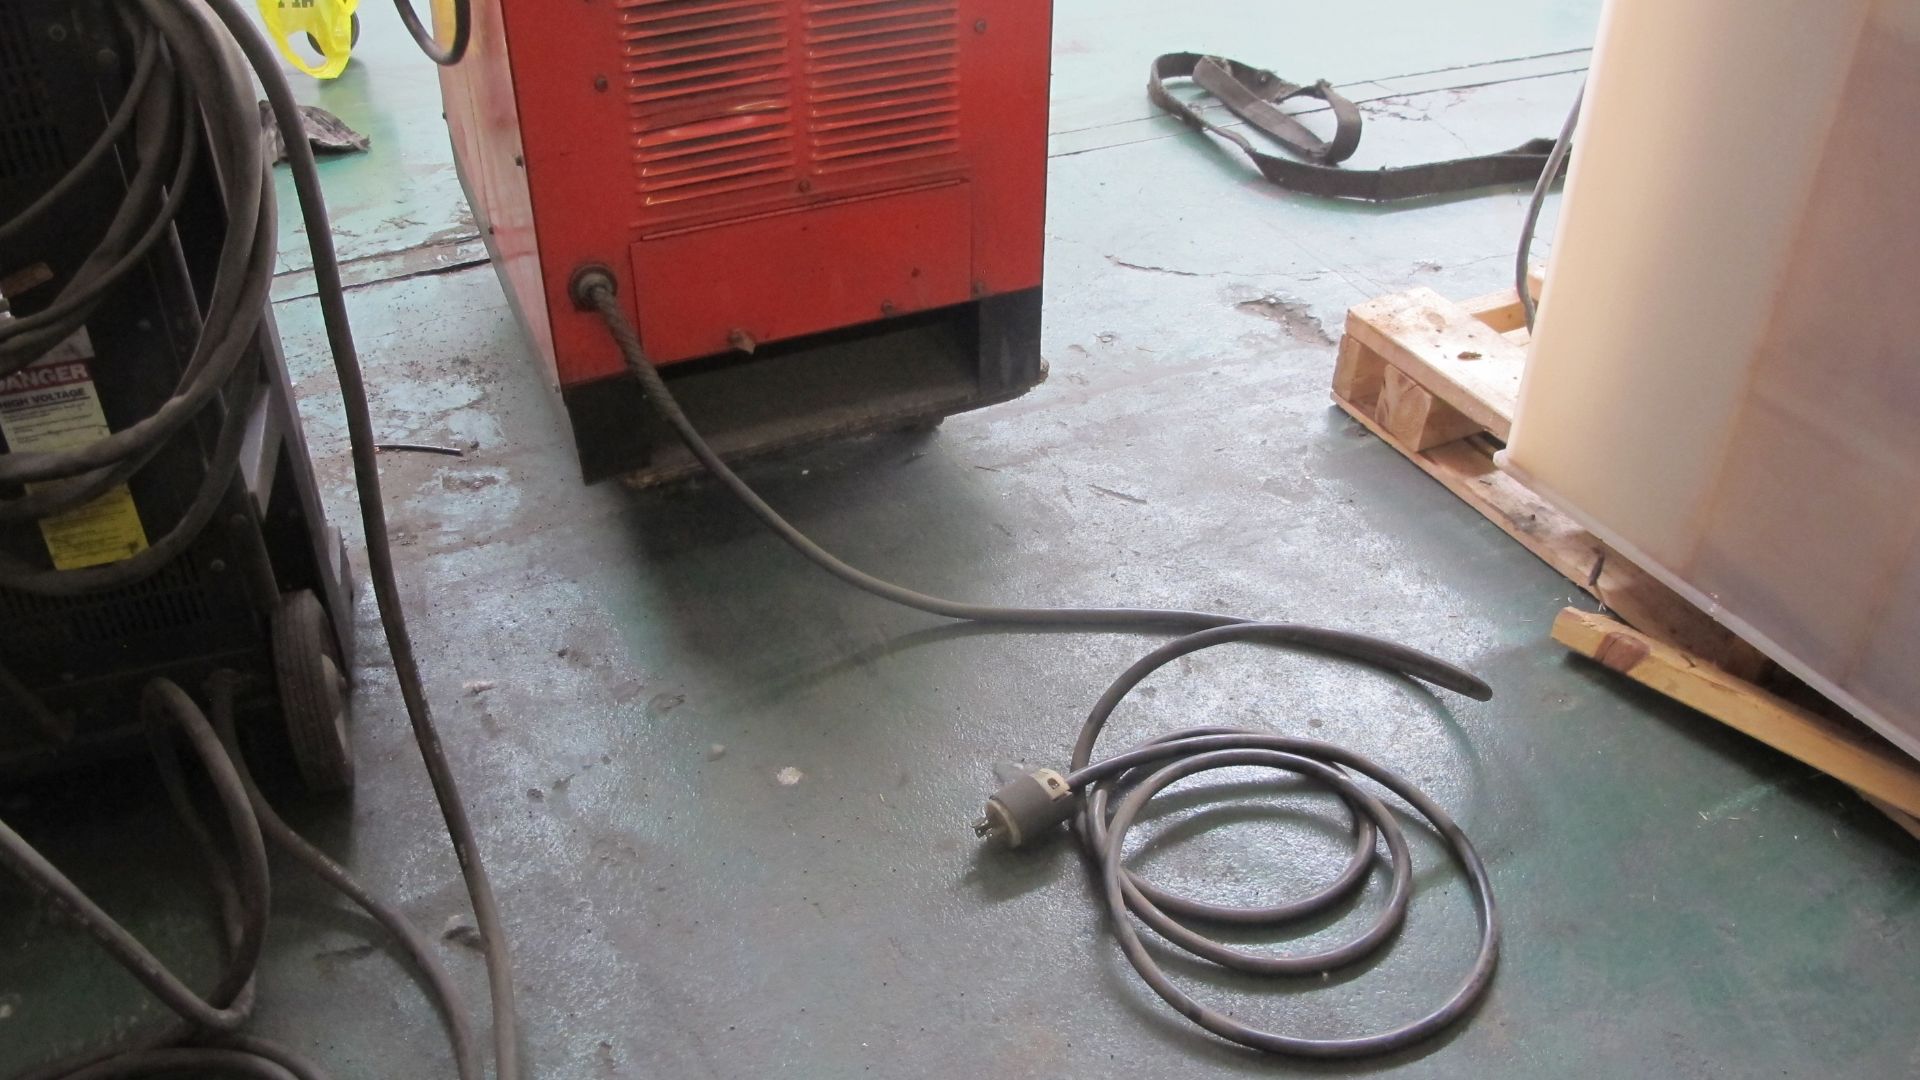 CANOX C-SRH-404 MIG WELDER W/CABLES, GUN AND CART - Image 3 of 3